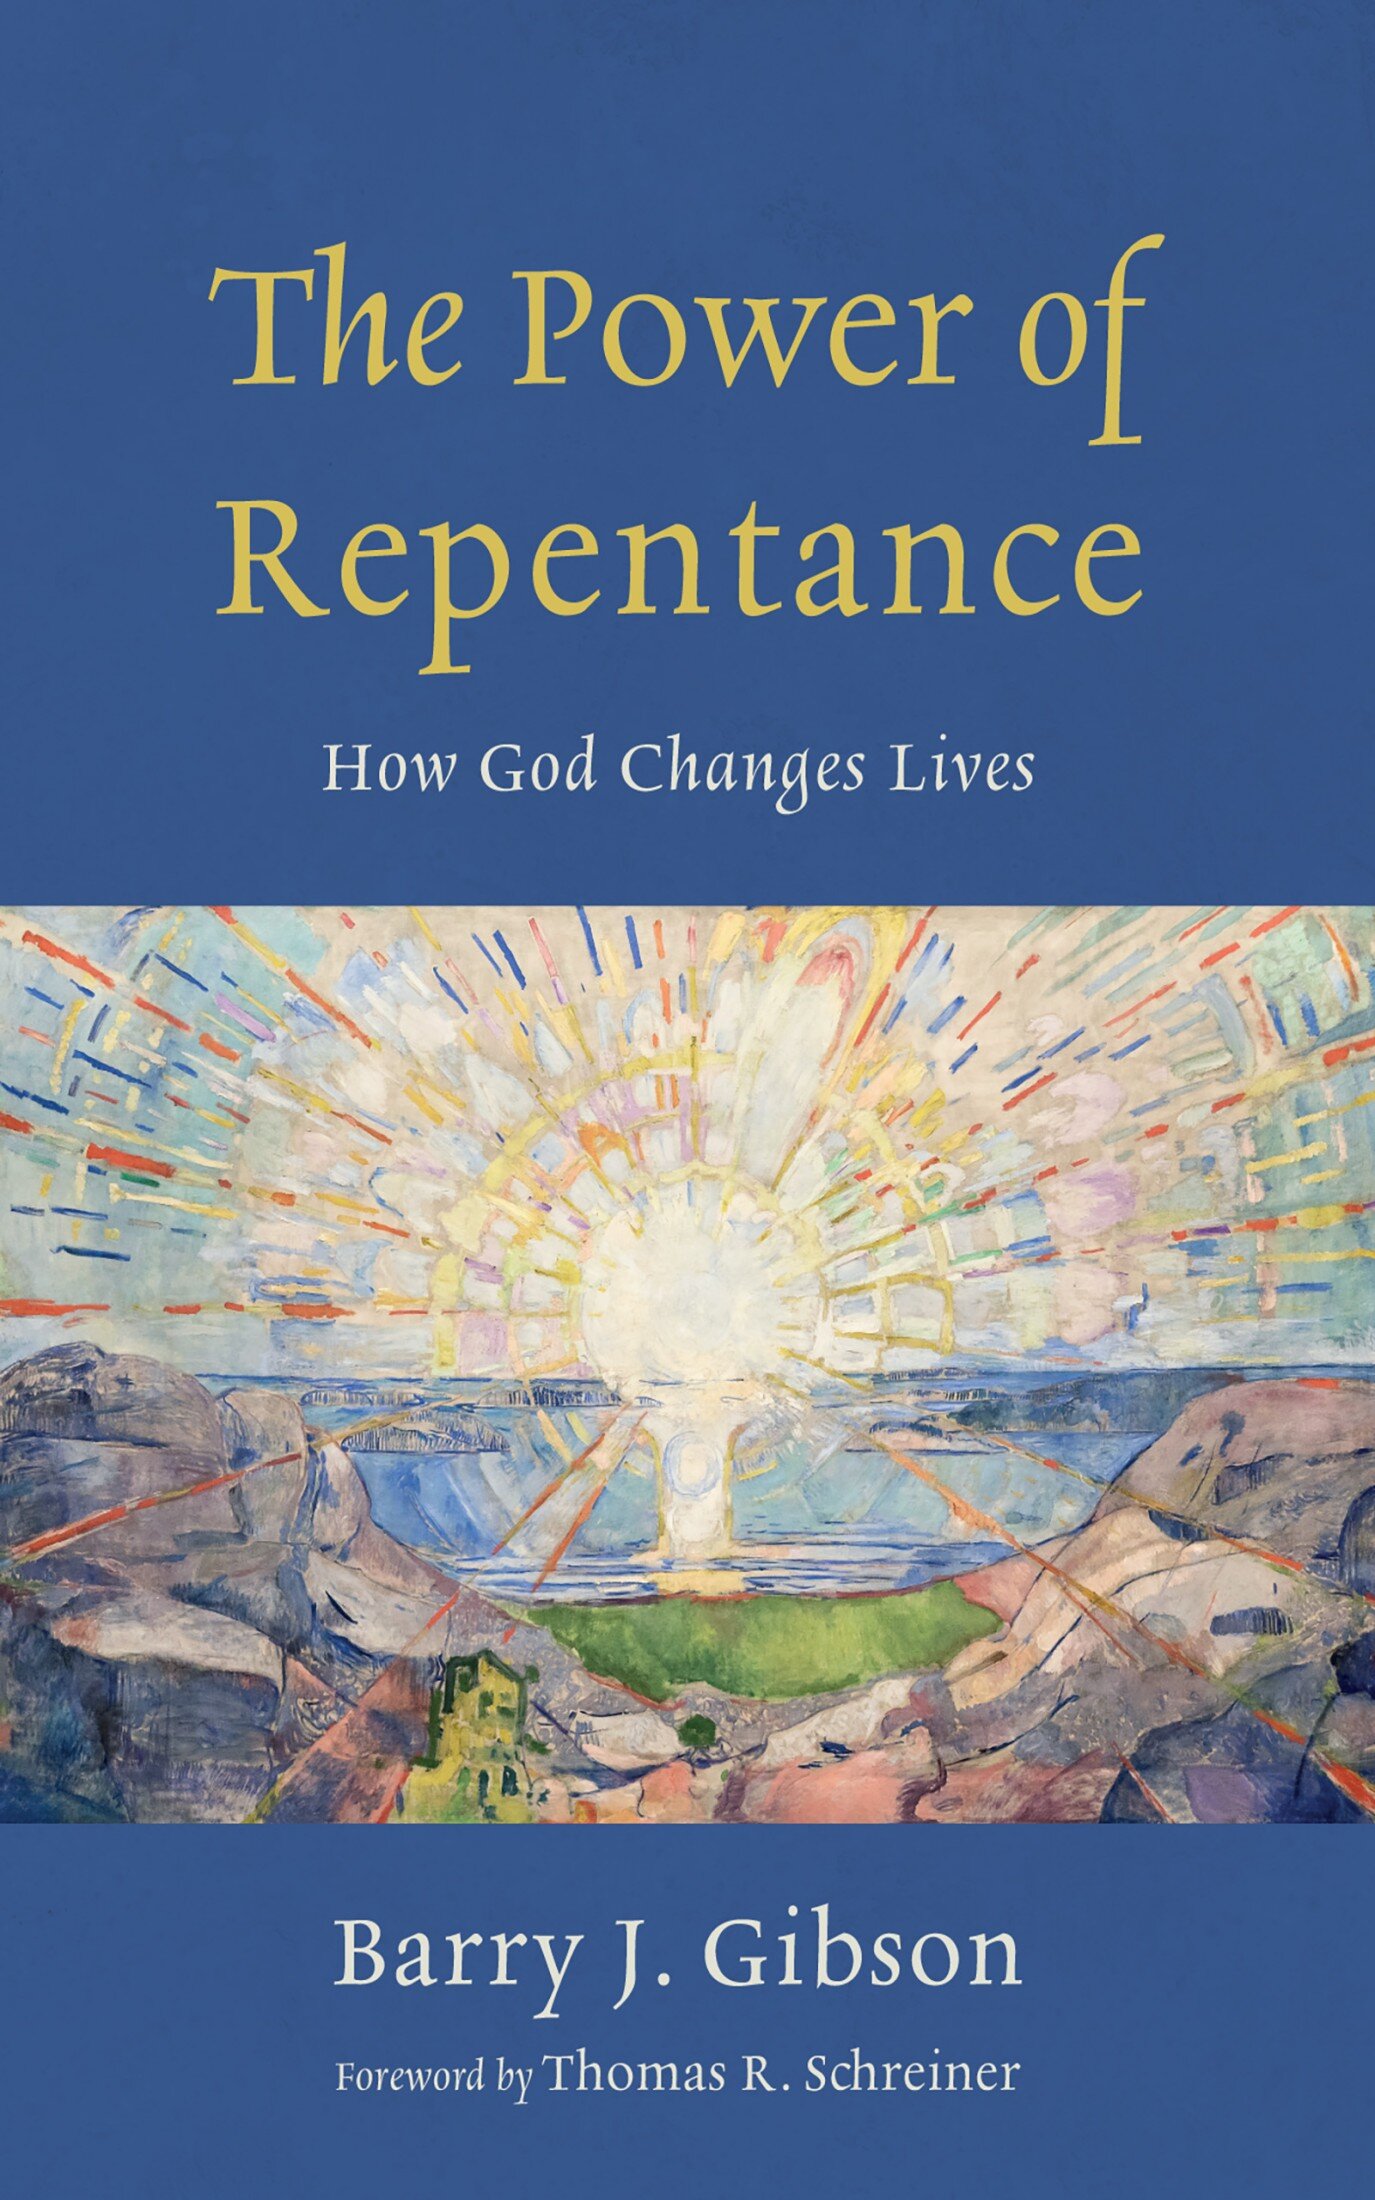 The Power of Repentance: How God Changes Lives